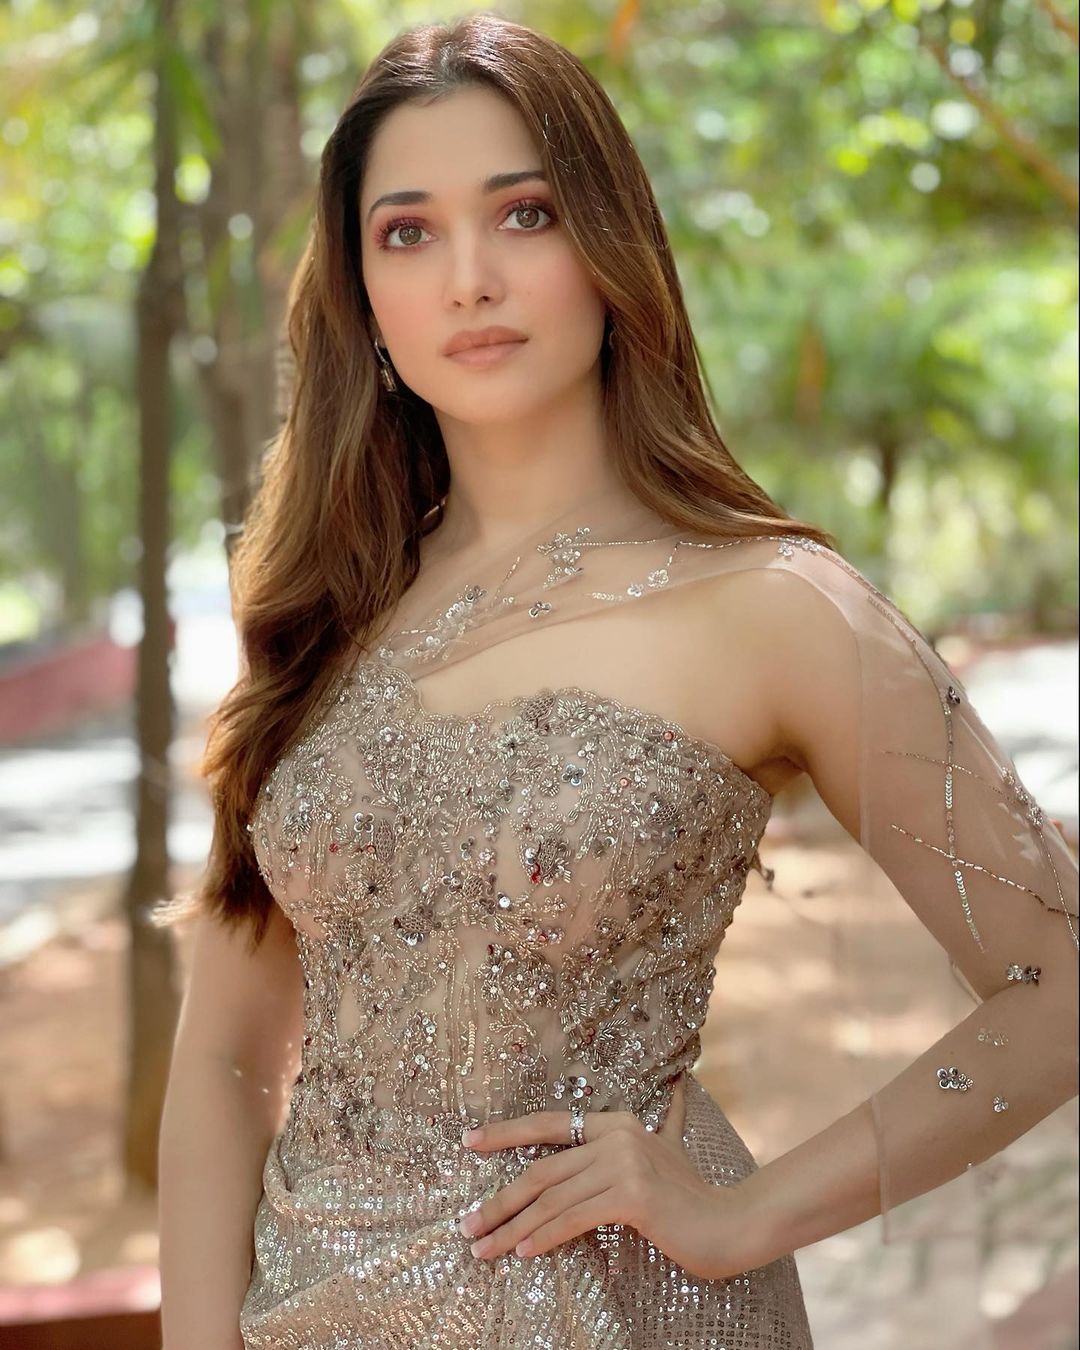 Tamannaah Bhatia looks stunning in the embellished outfit. 